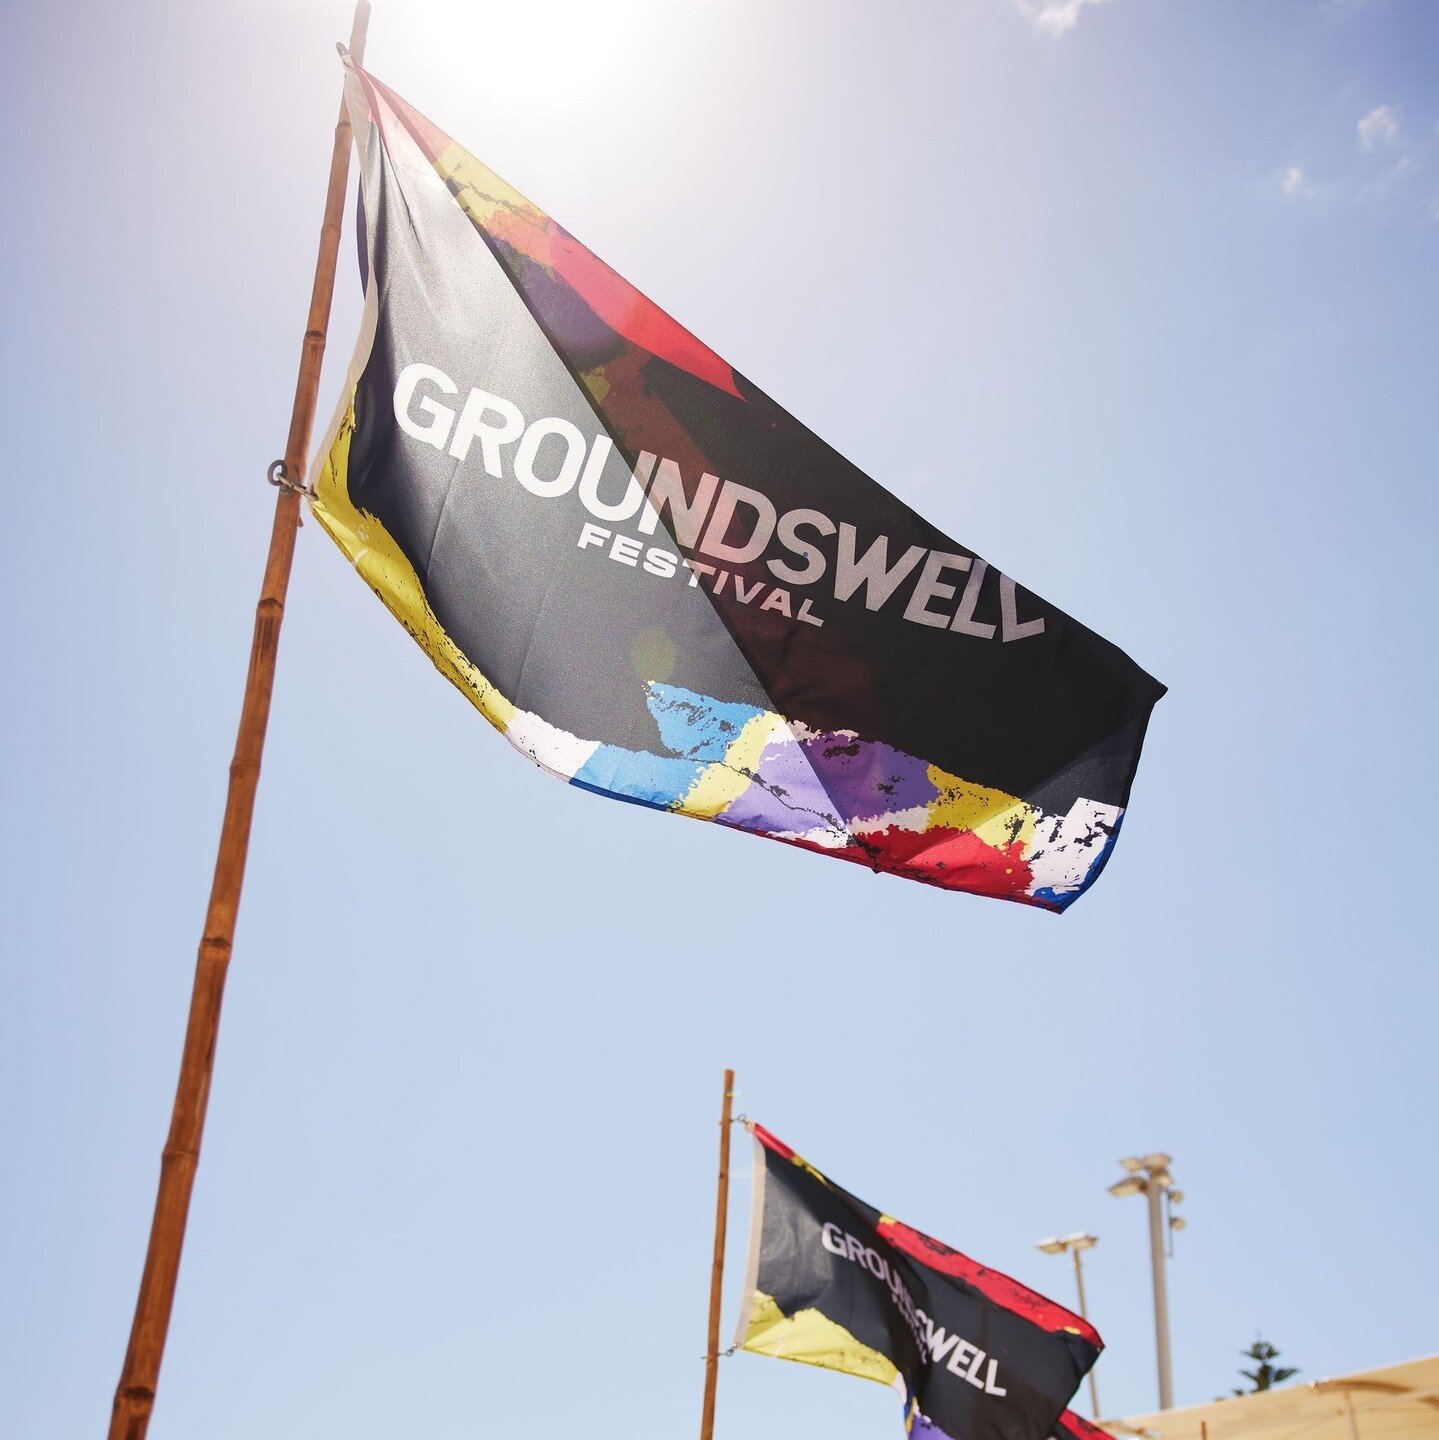 DAY 3 ☀️ last chance to get in on all the Groundswell 2023 action! ⁠
⁠
@citystirlingwa #groundswellfest #groundswellfest2023 #yewww